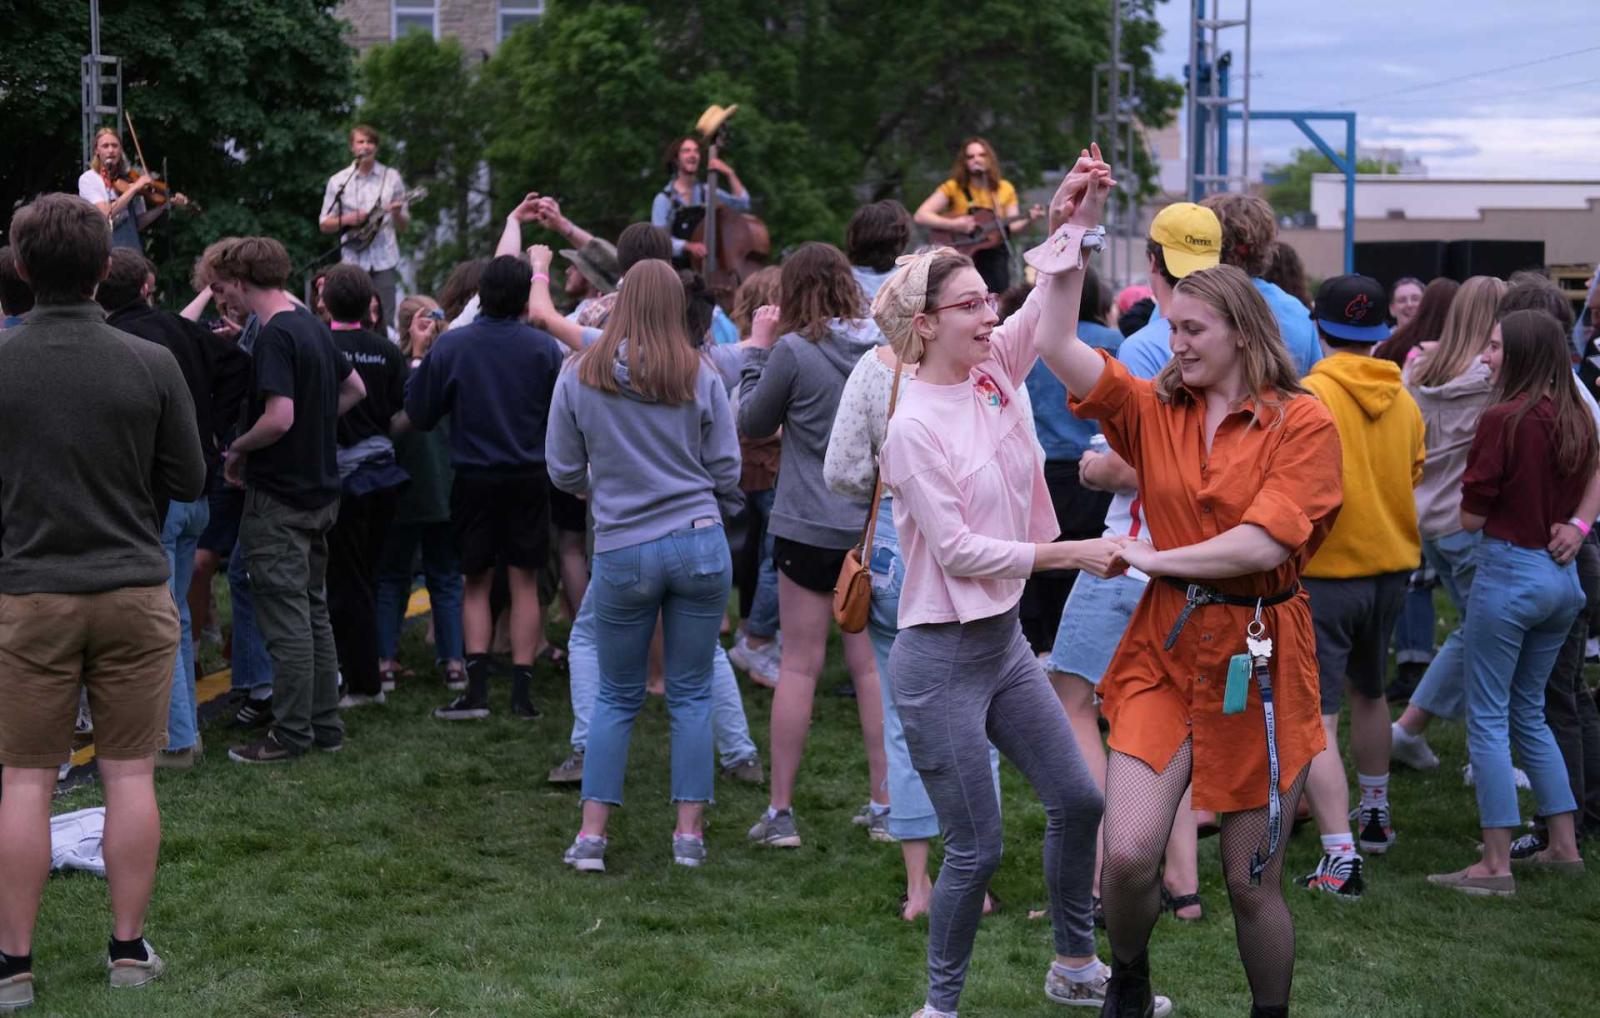 Students dance on lawn while bluegrass group performs in background onstage